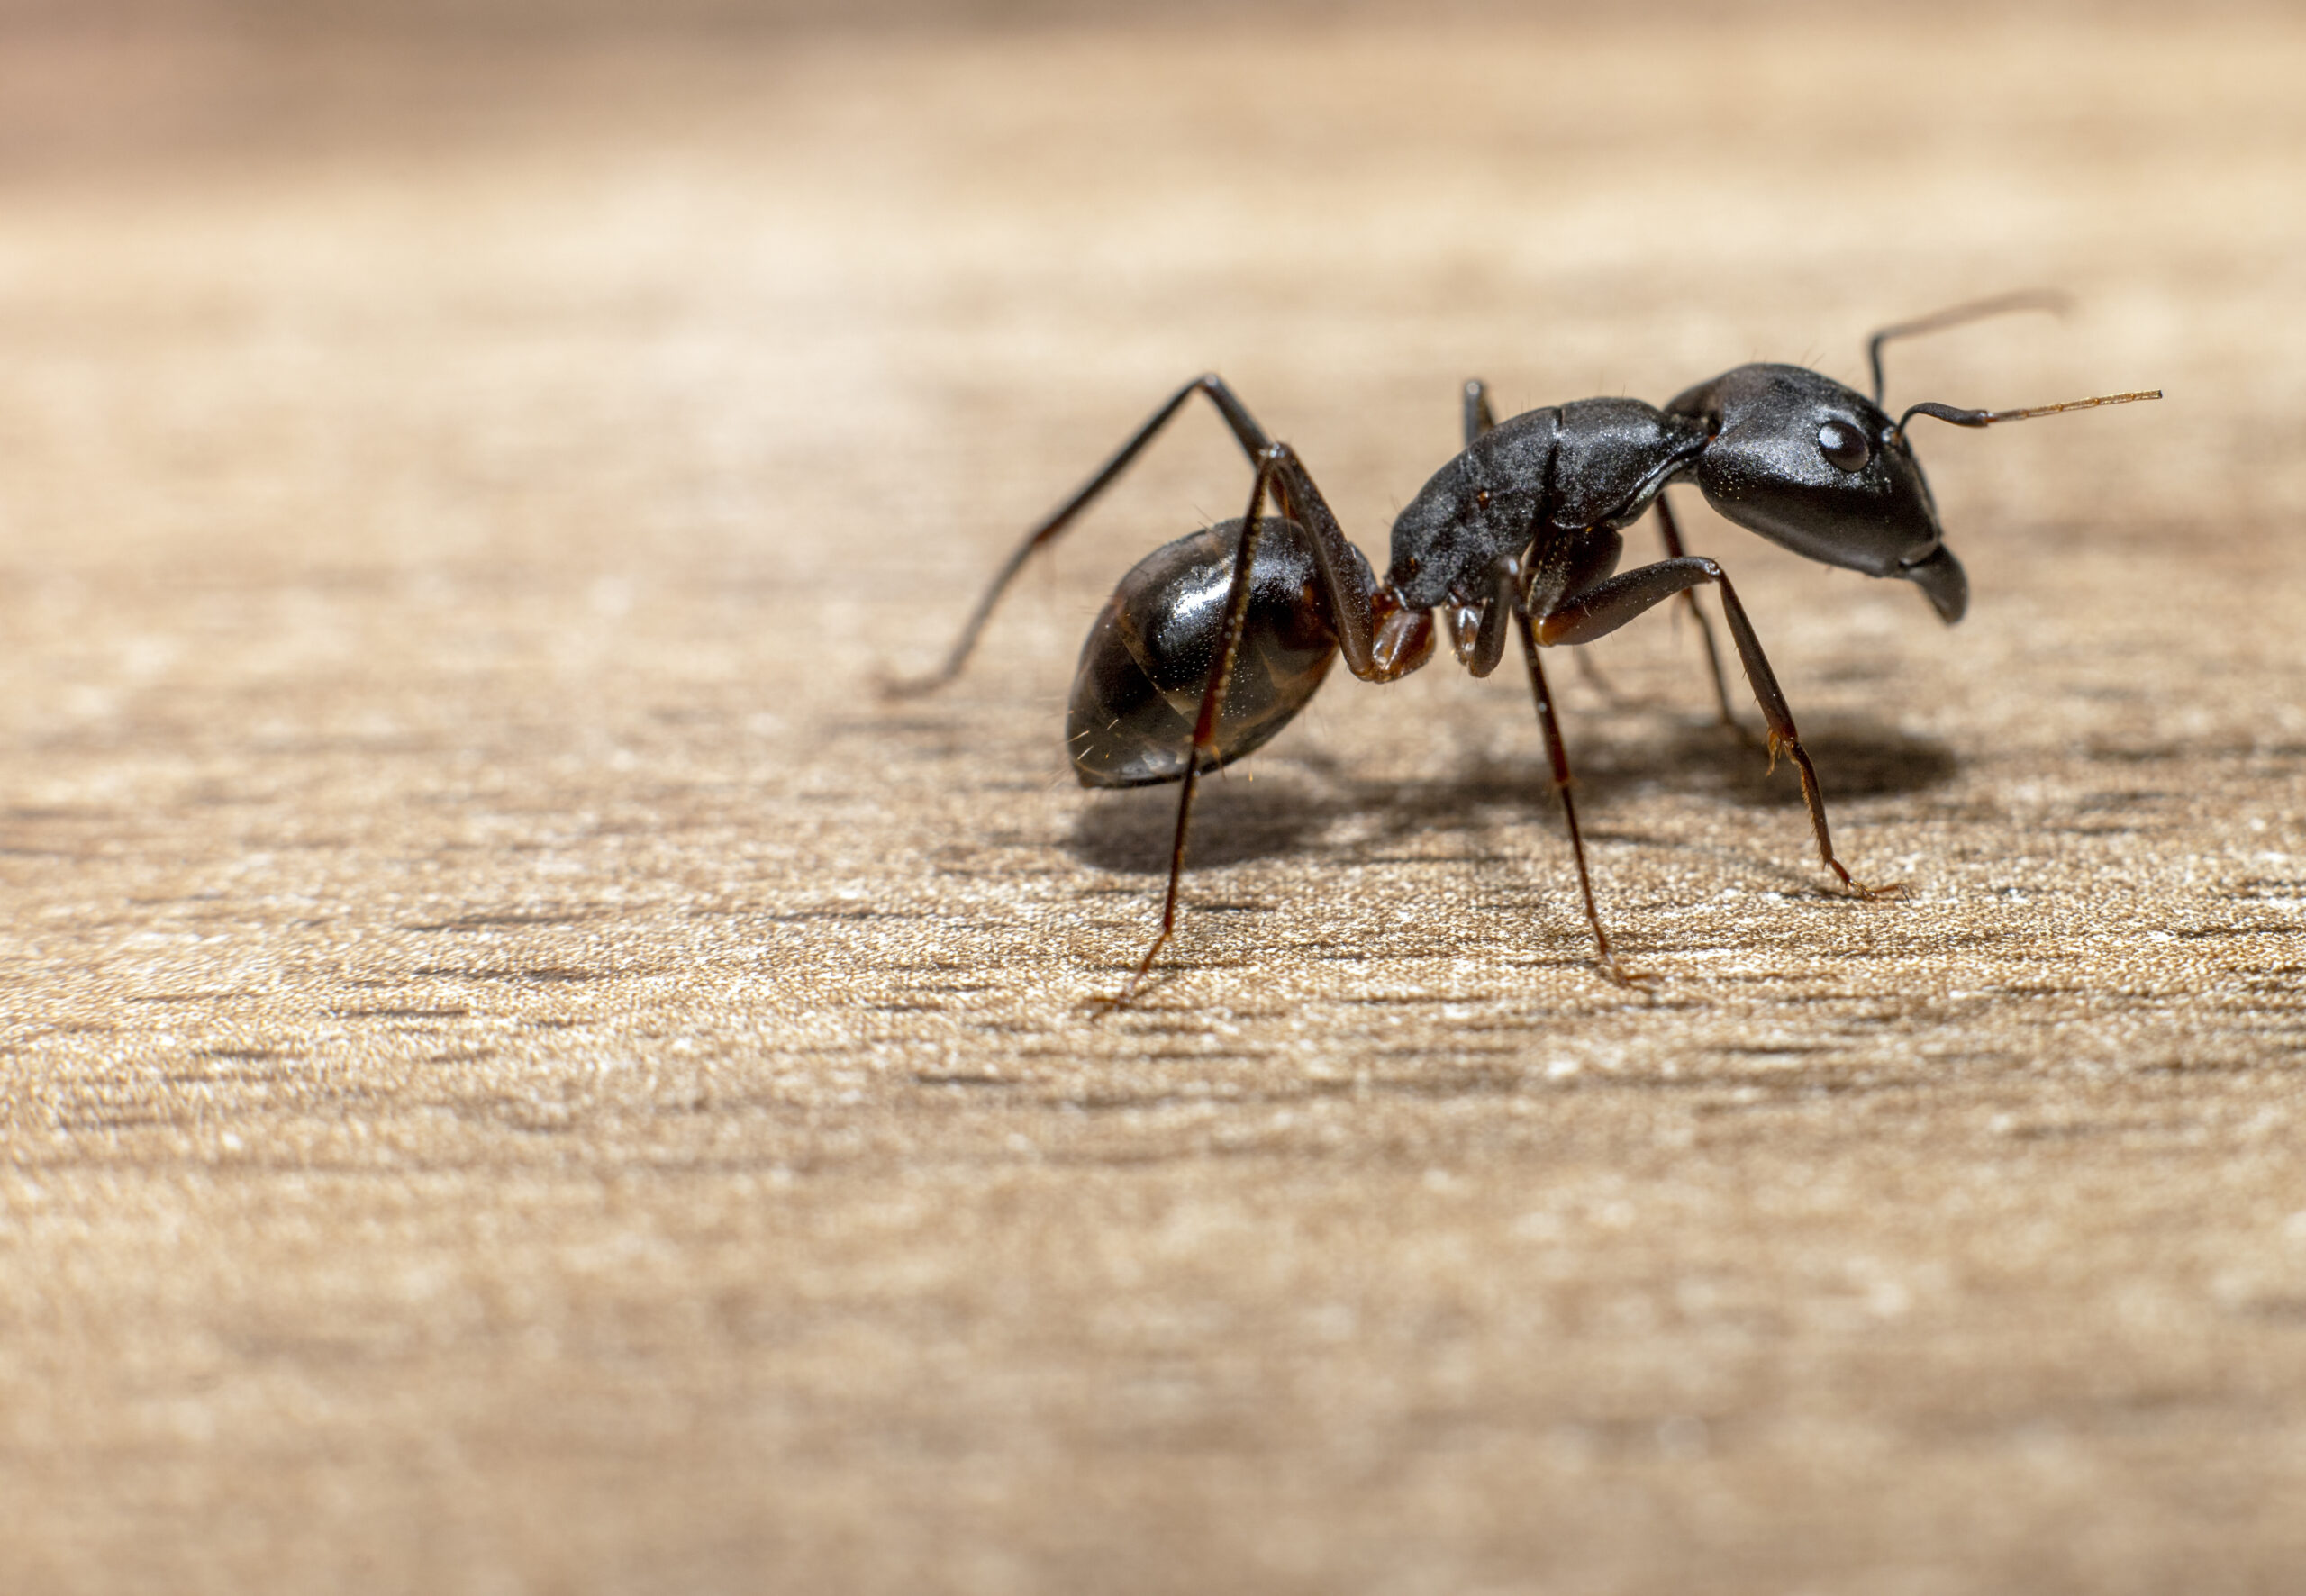 Macro photograph of Camponotus Xerxes, the Giant black ant found in the United Arab Emirates